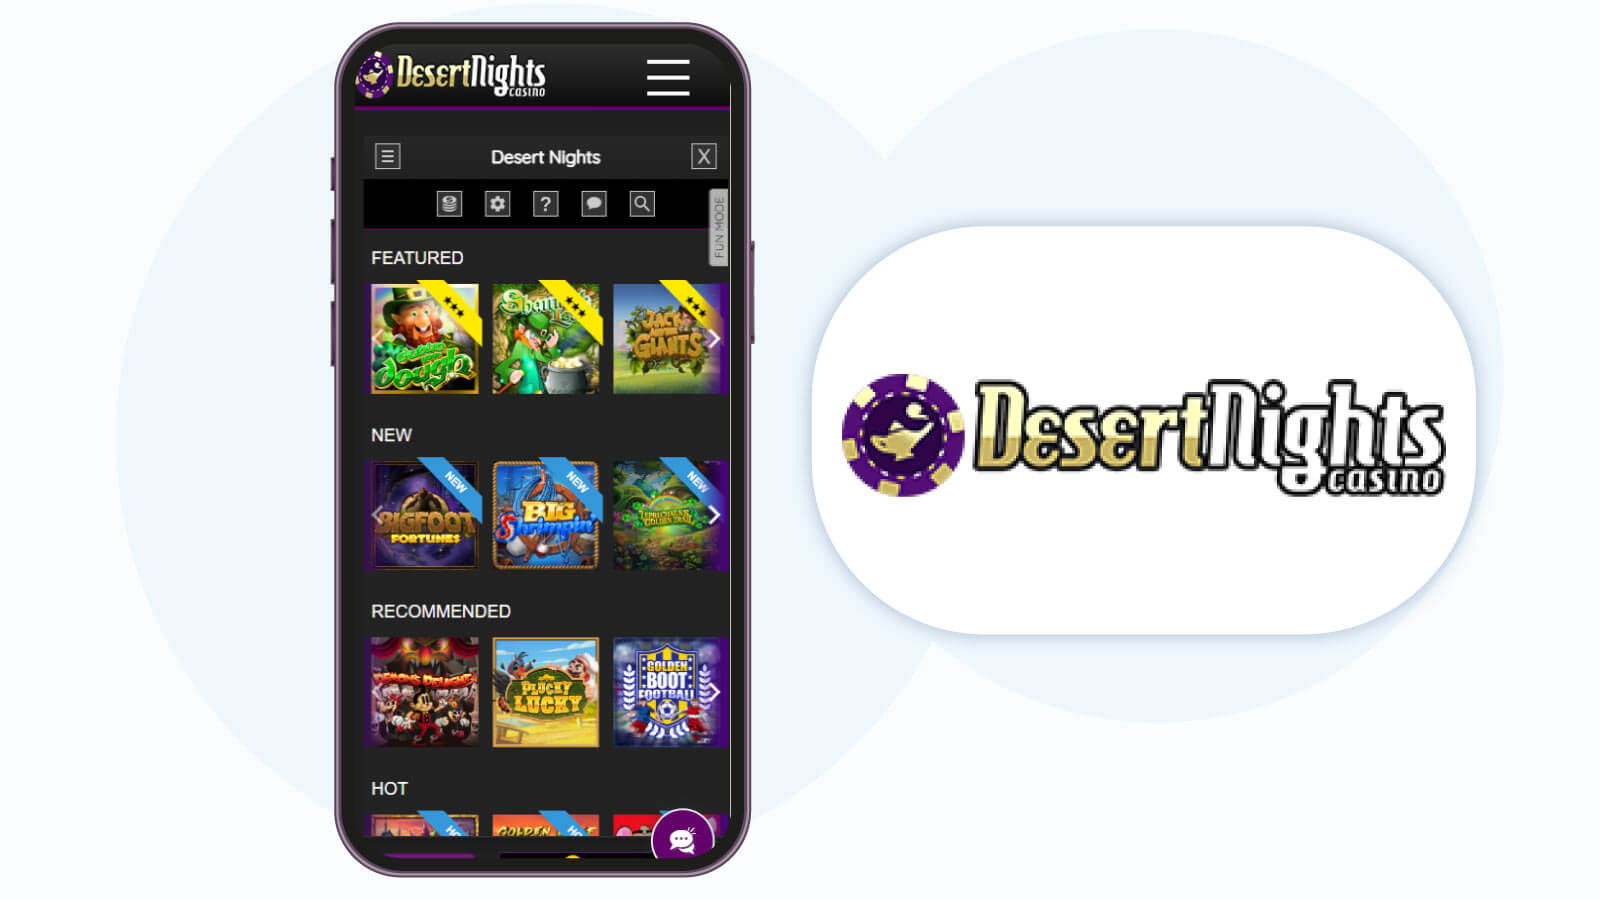 DesertNights-Casino-Best-20-Free-Spins-No-Deposit-to-Experience-a-Mobile-Casino